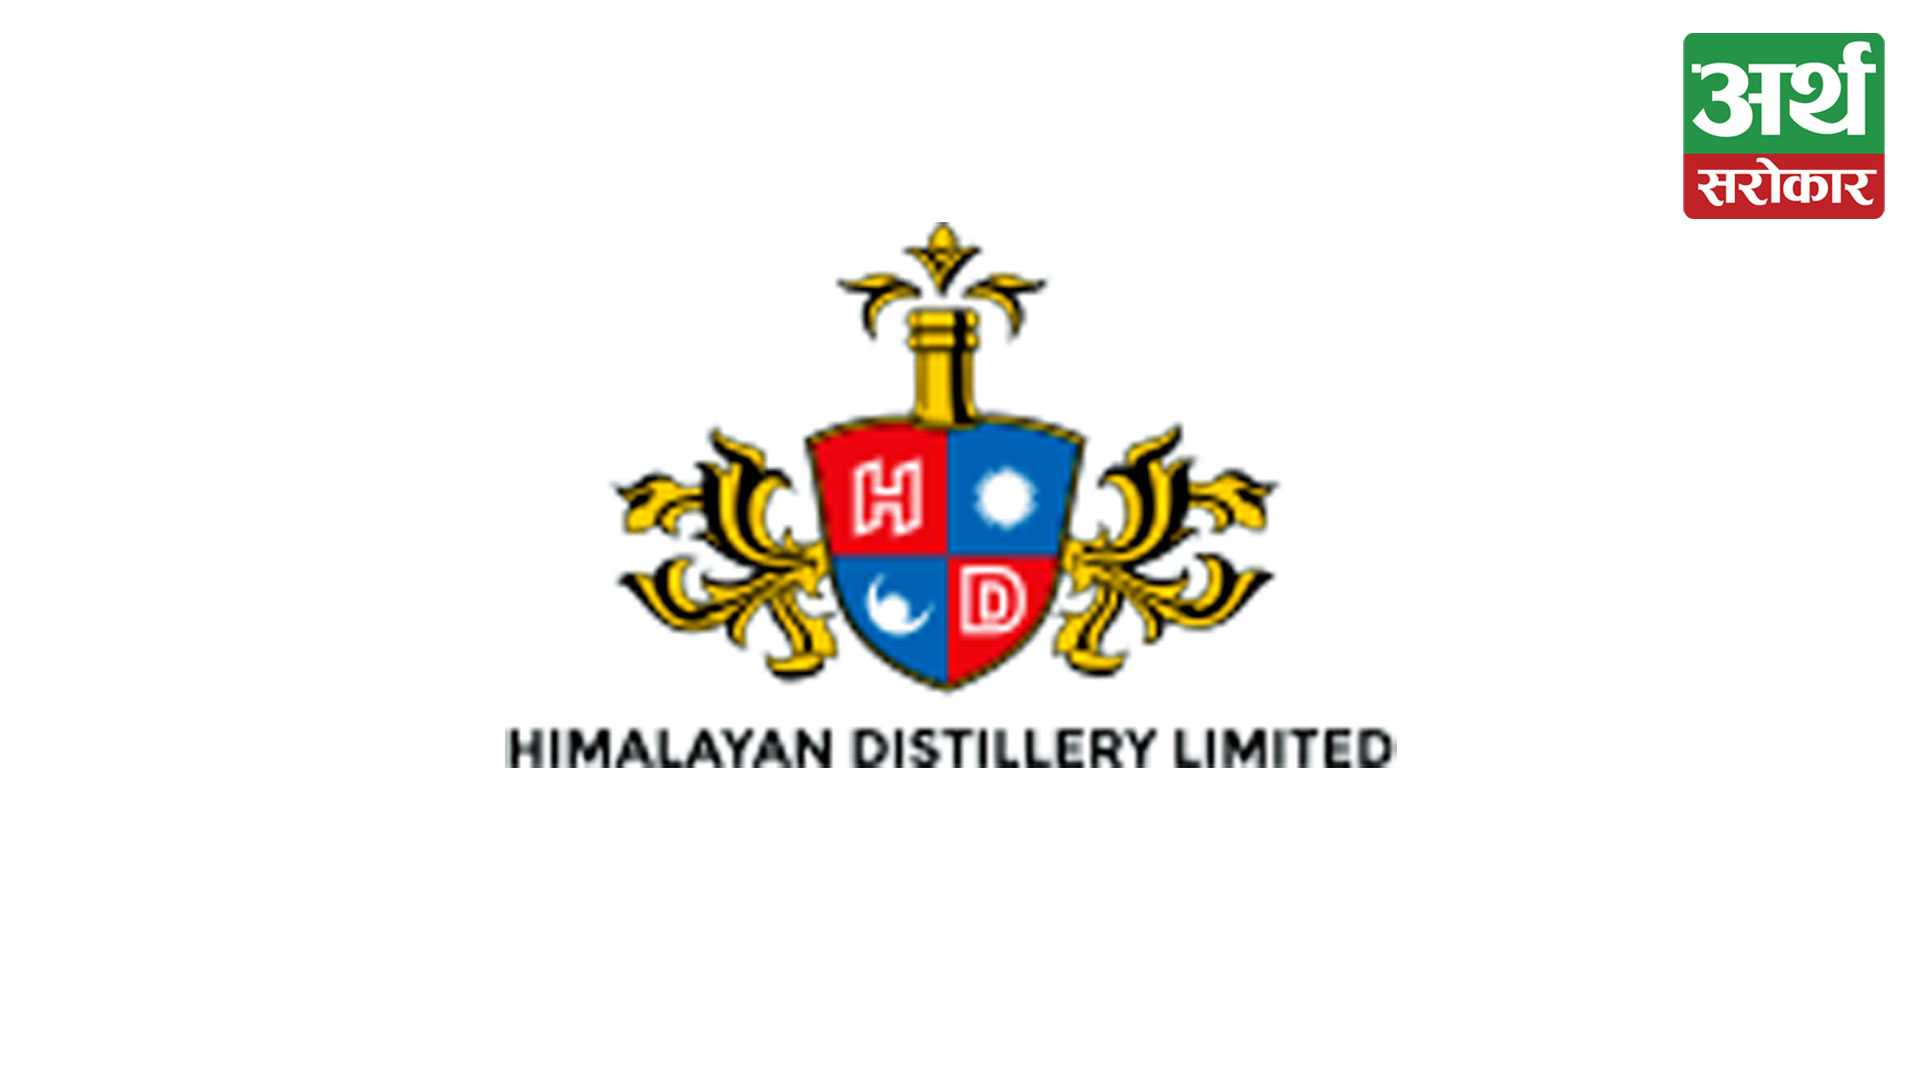 Himalayan Distillery announce to distribute 25% dividend